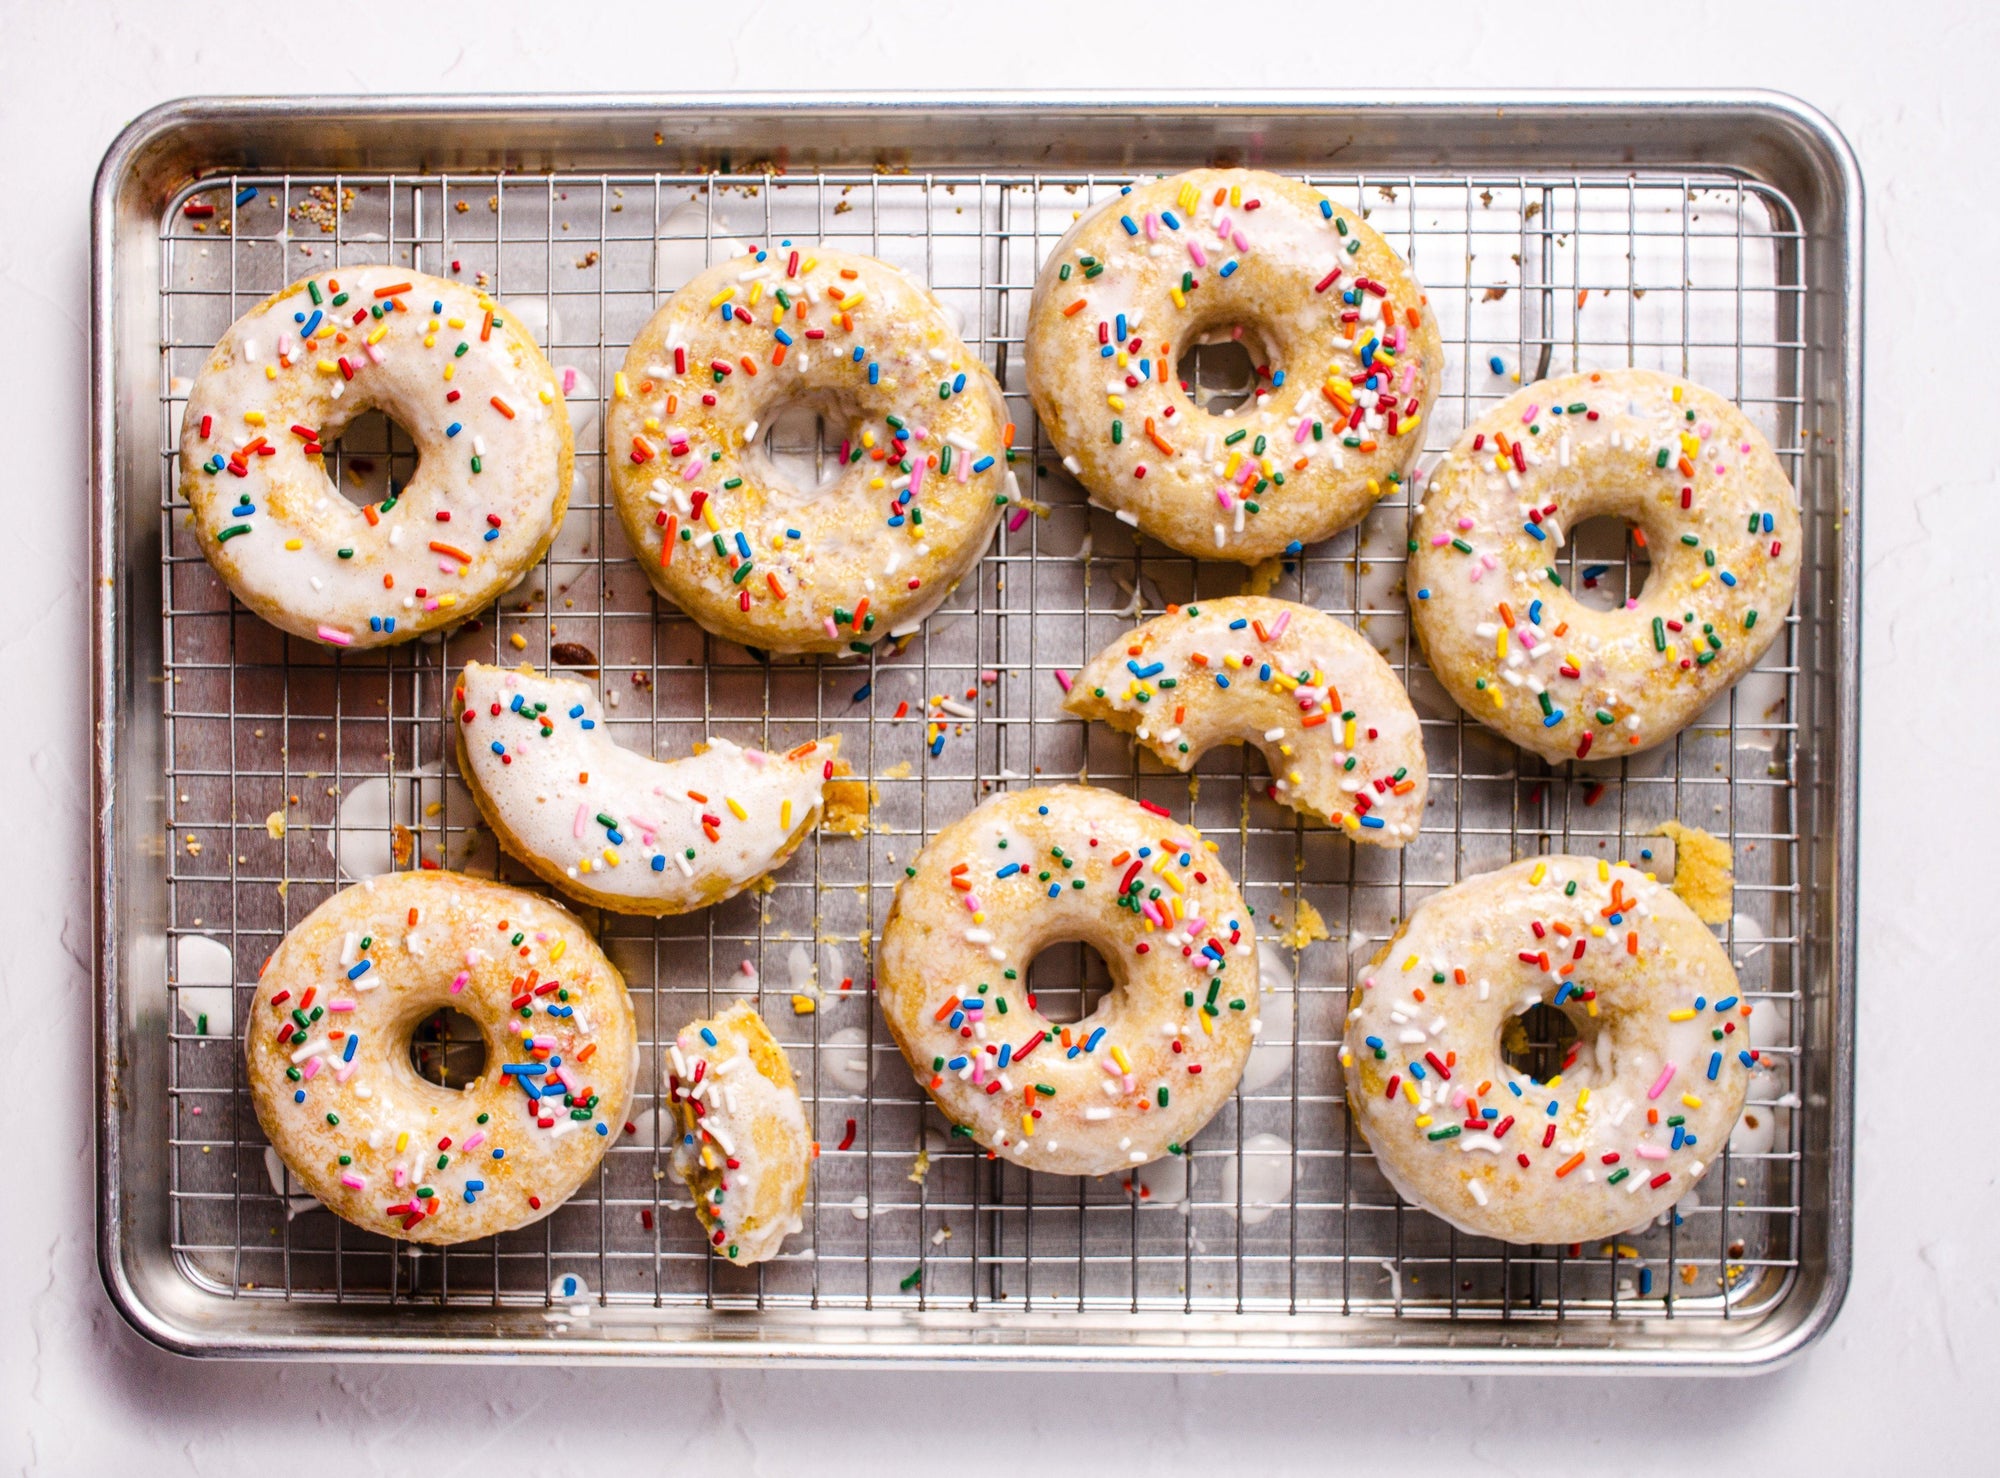 gluten-free baked donuts with funfetti